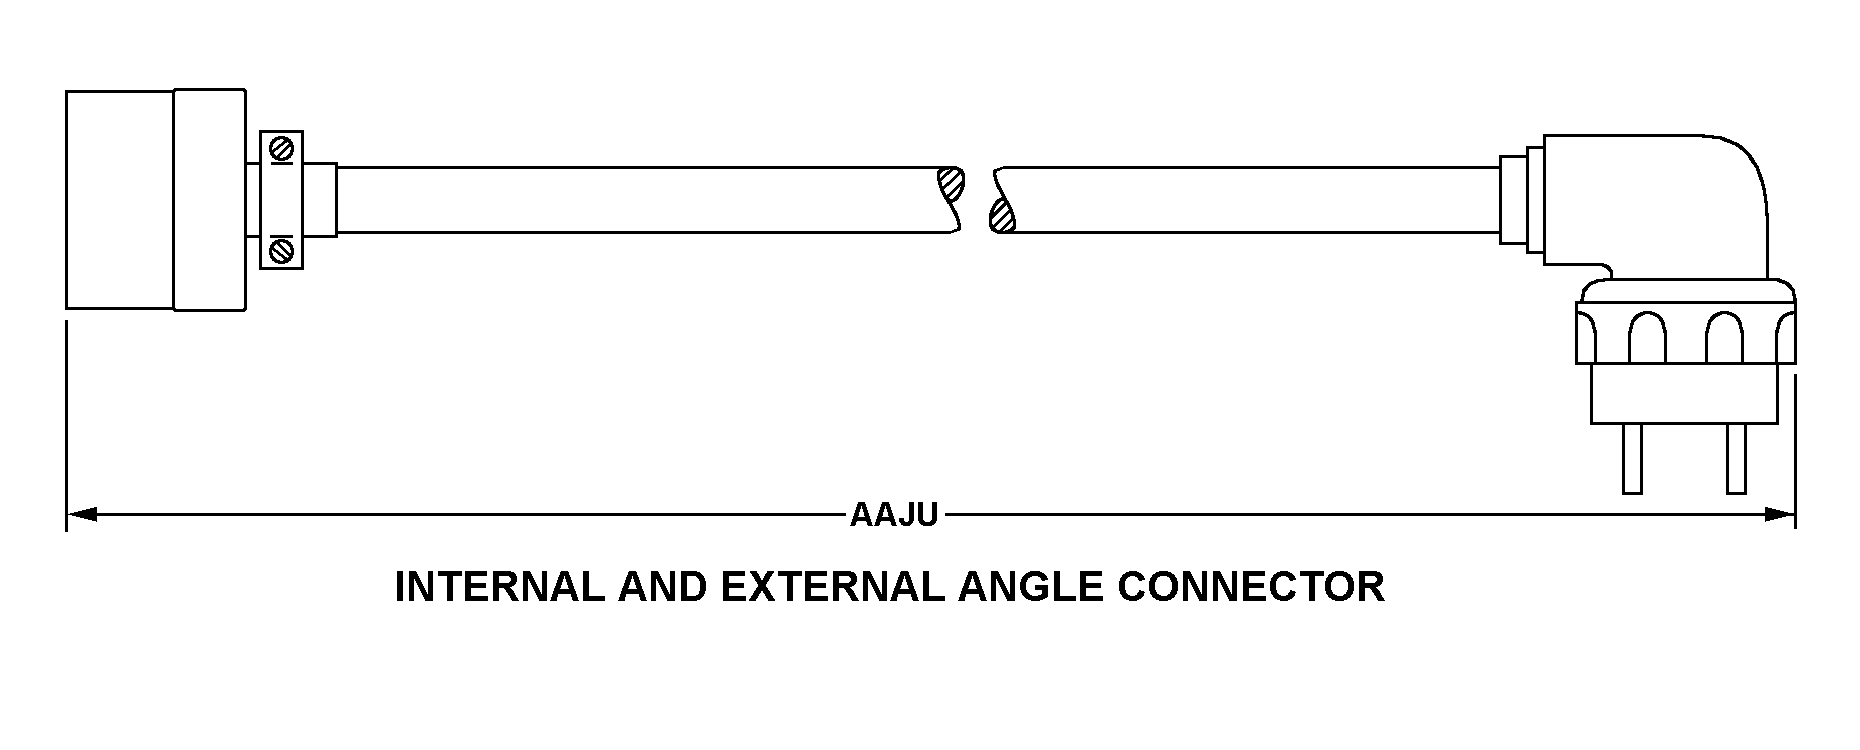 INTERNAL AND EXTERNAL ANGLE CONNECTOR style nsn 5995-01-073-6767